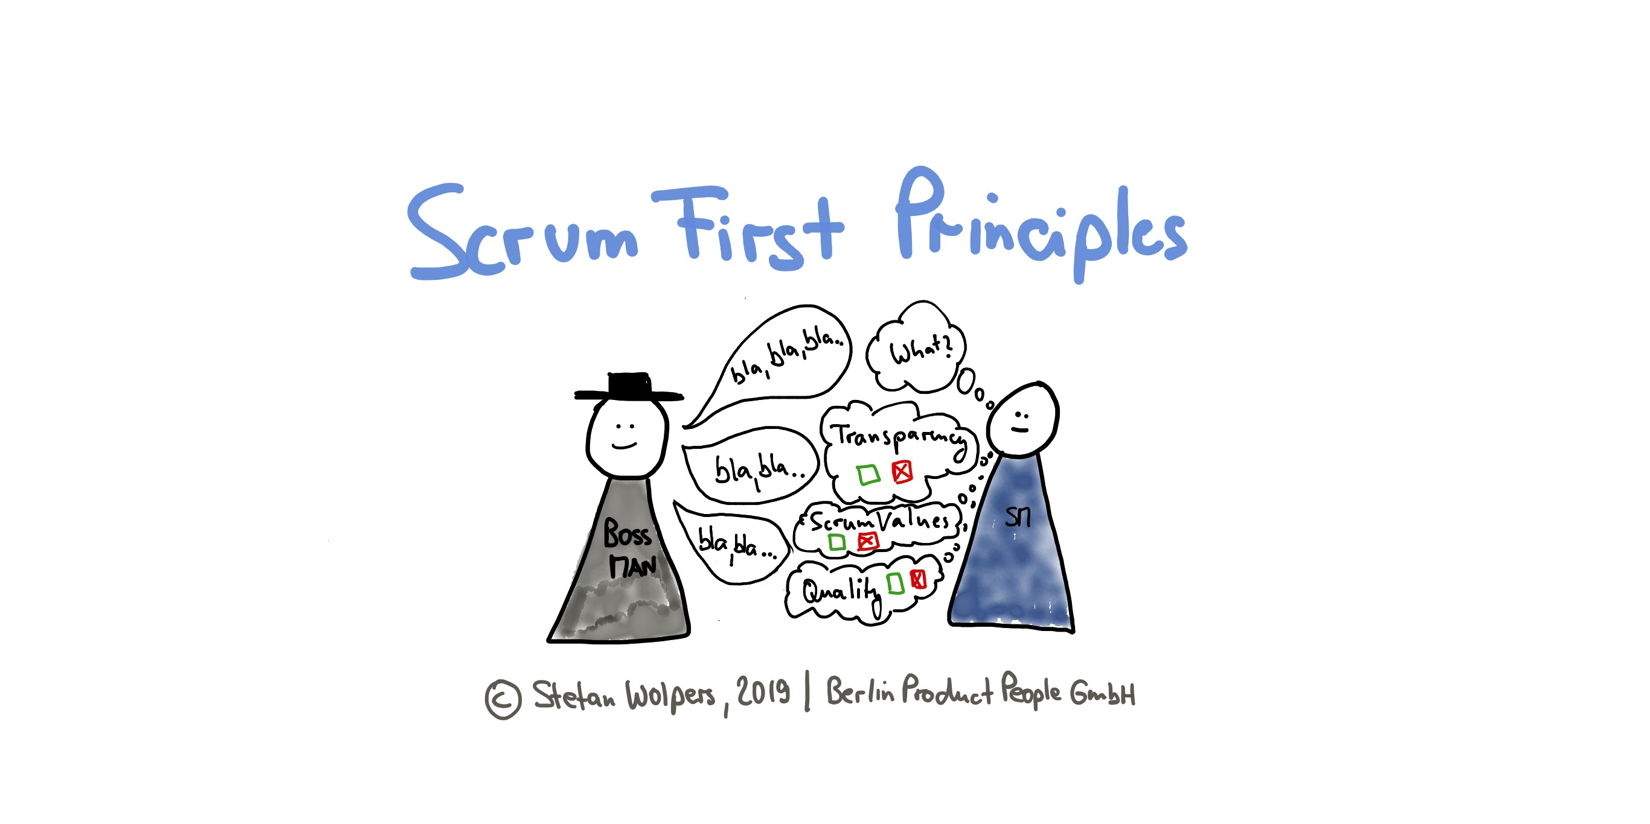 Scrum First Principles — Berlin Product People GmbH